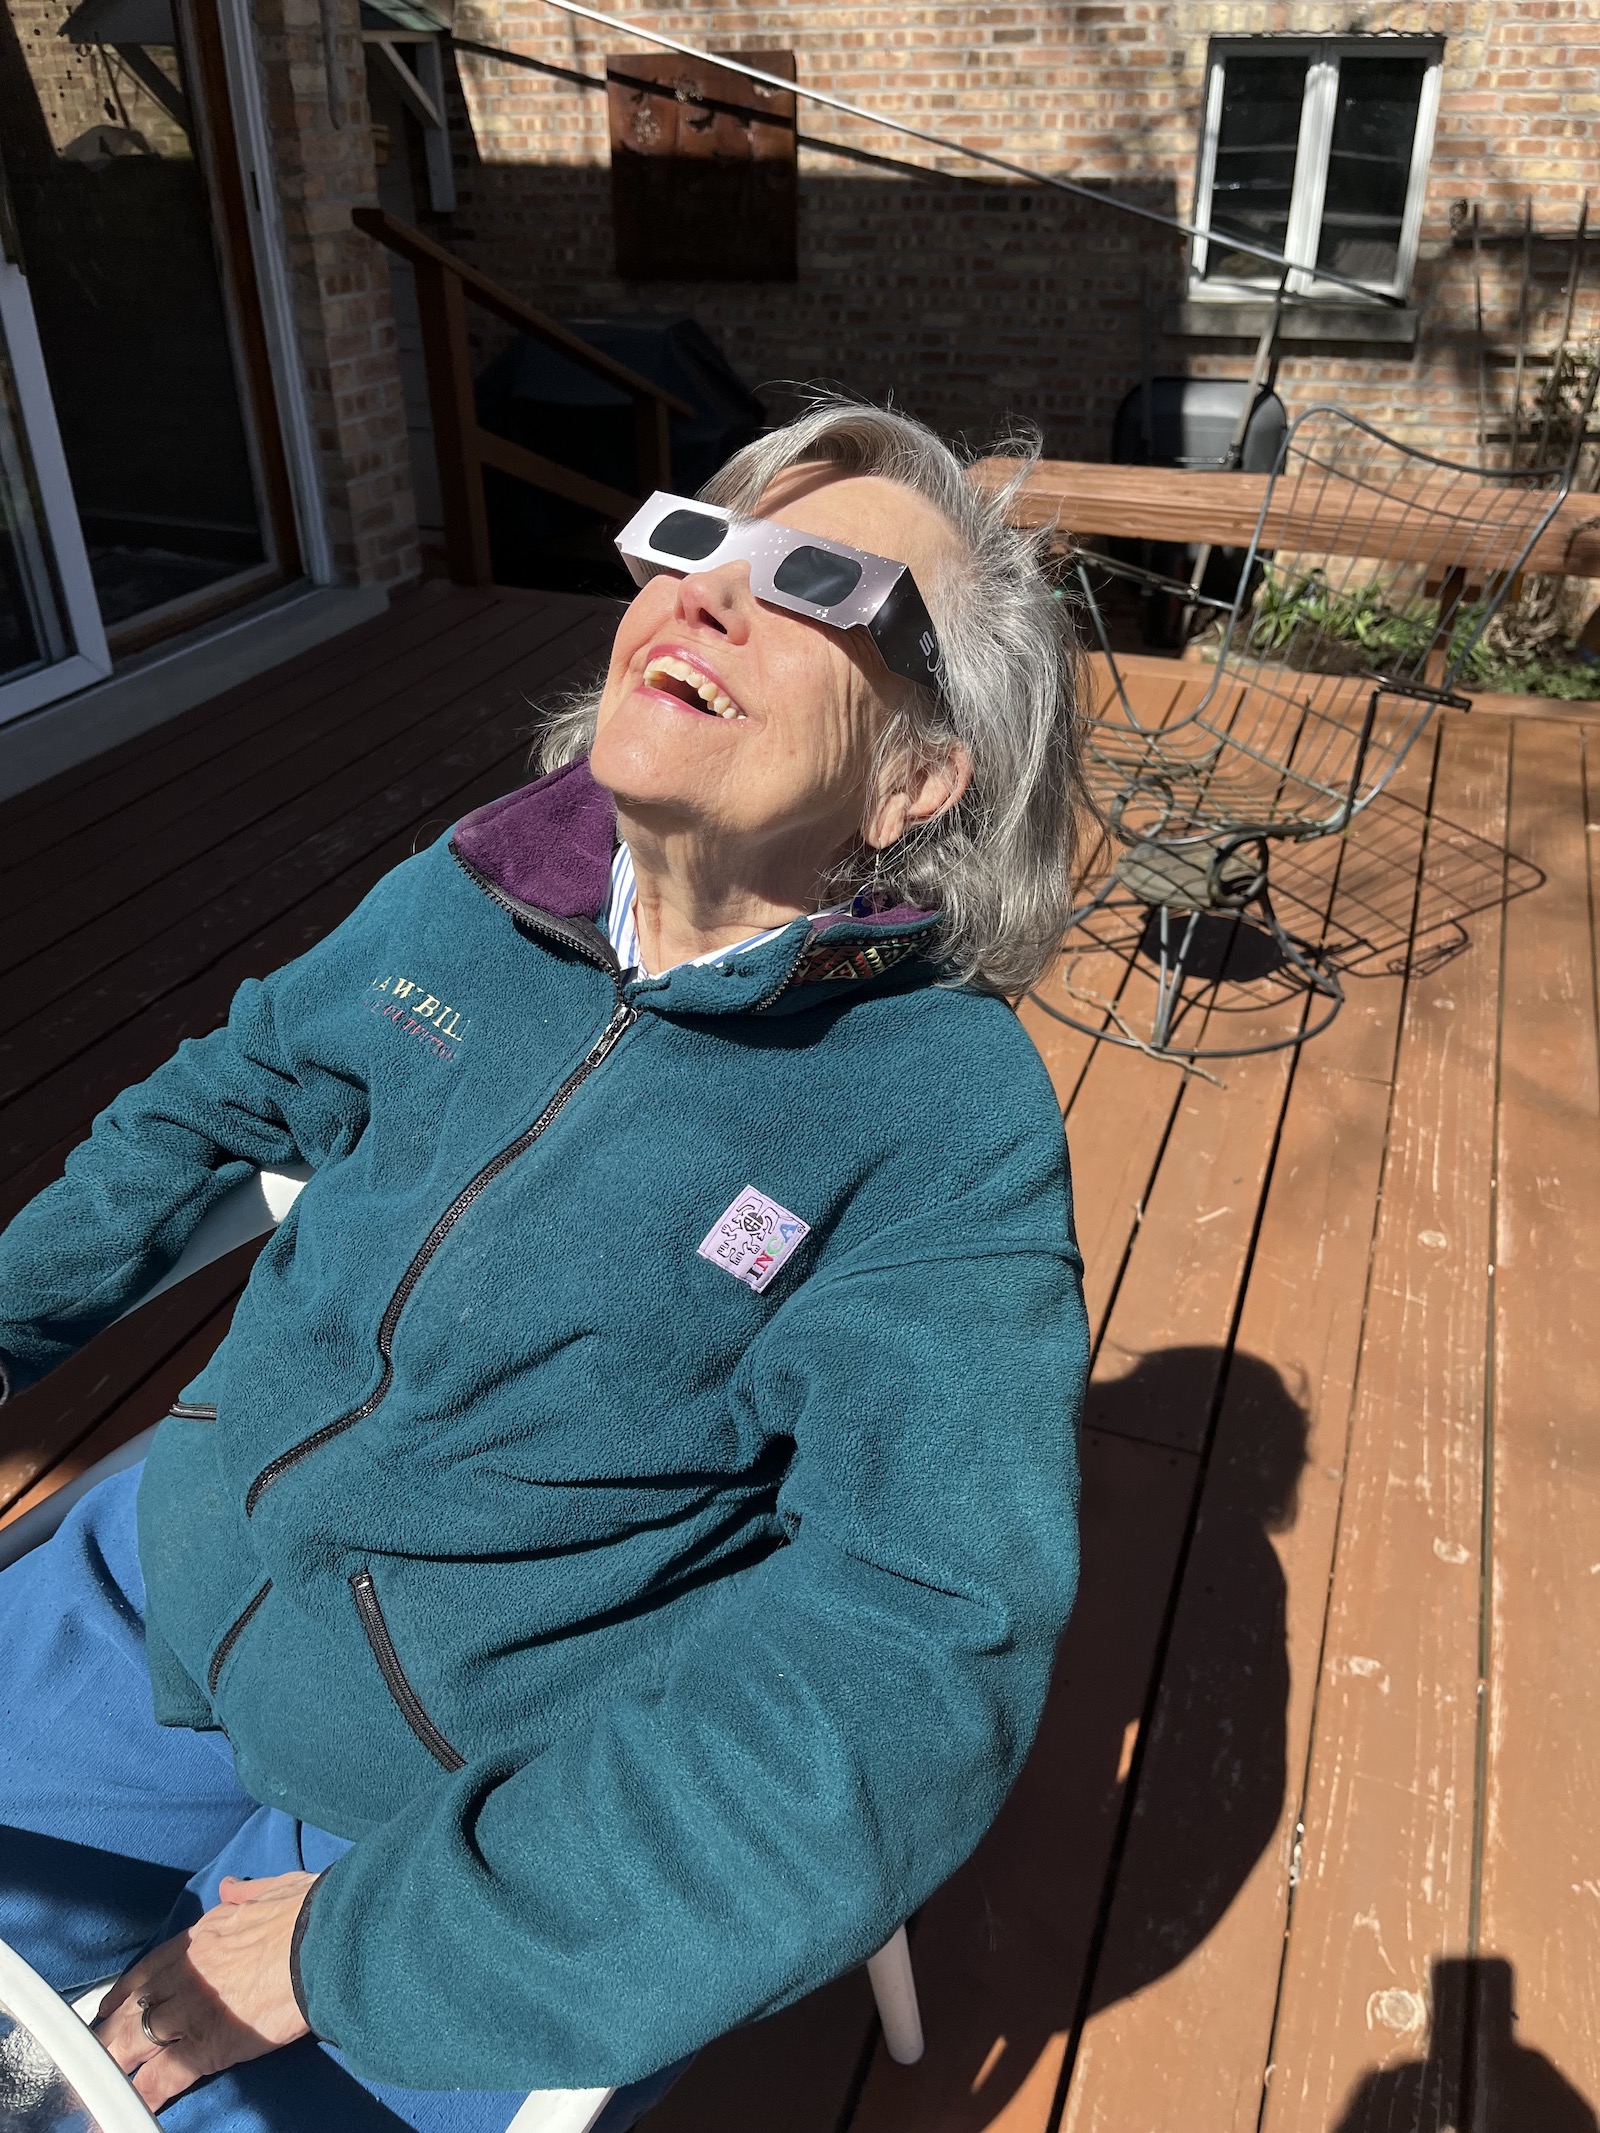 A woman wearing eclipse glasses leaning back in a lawn chair watching the eclipse.